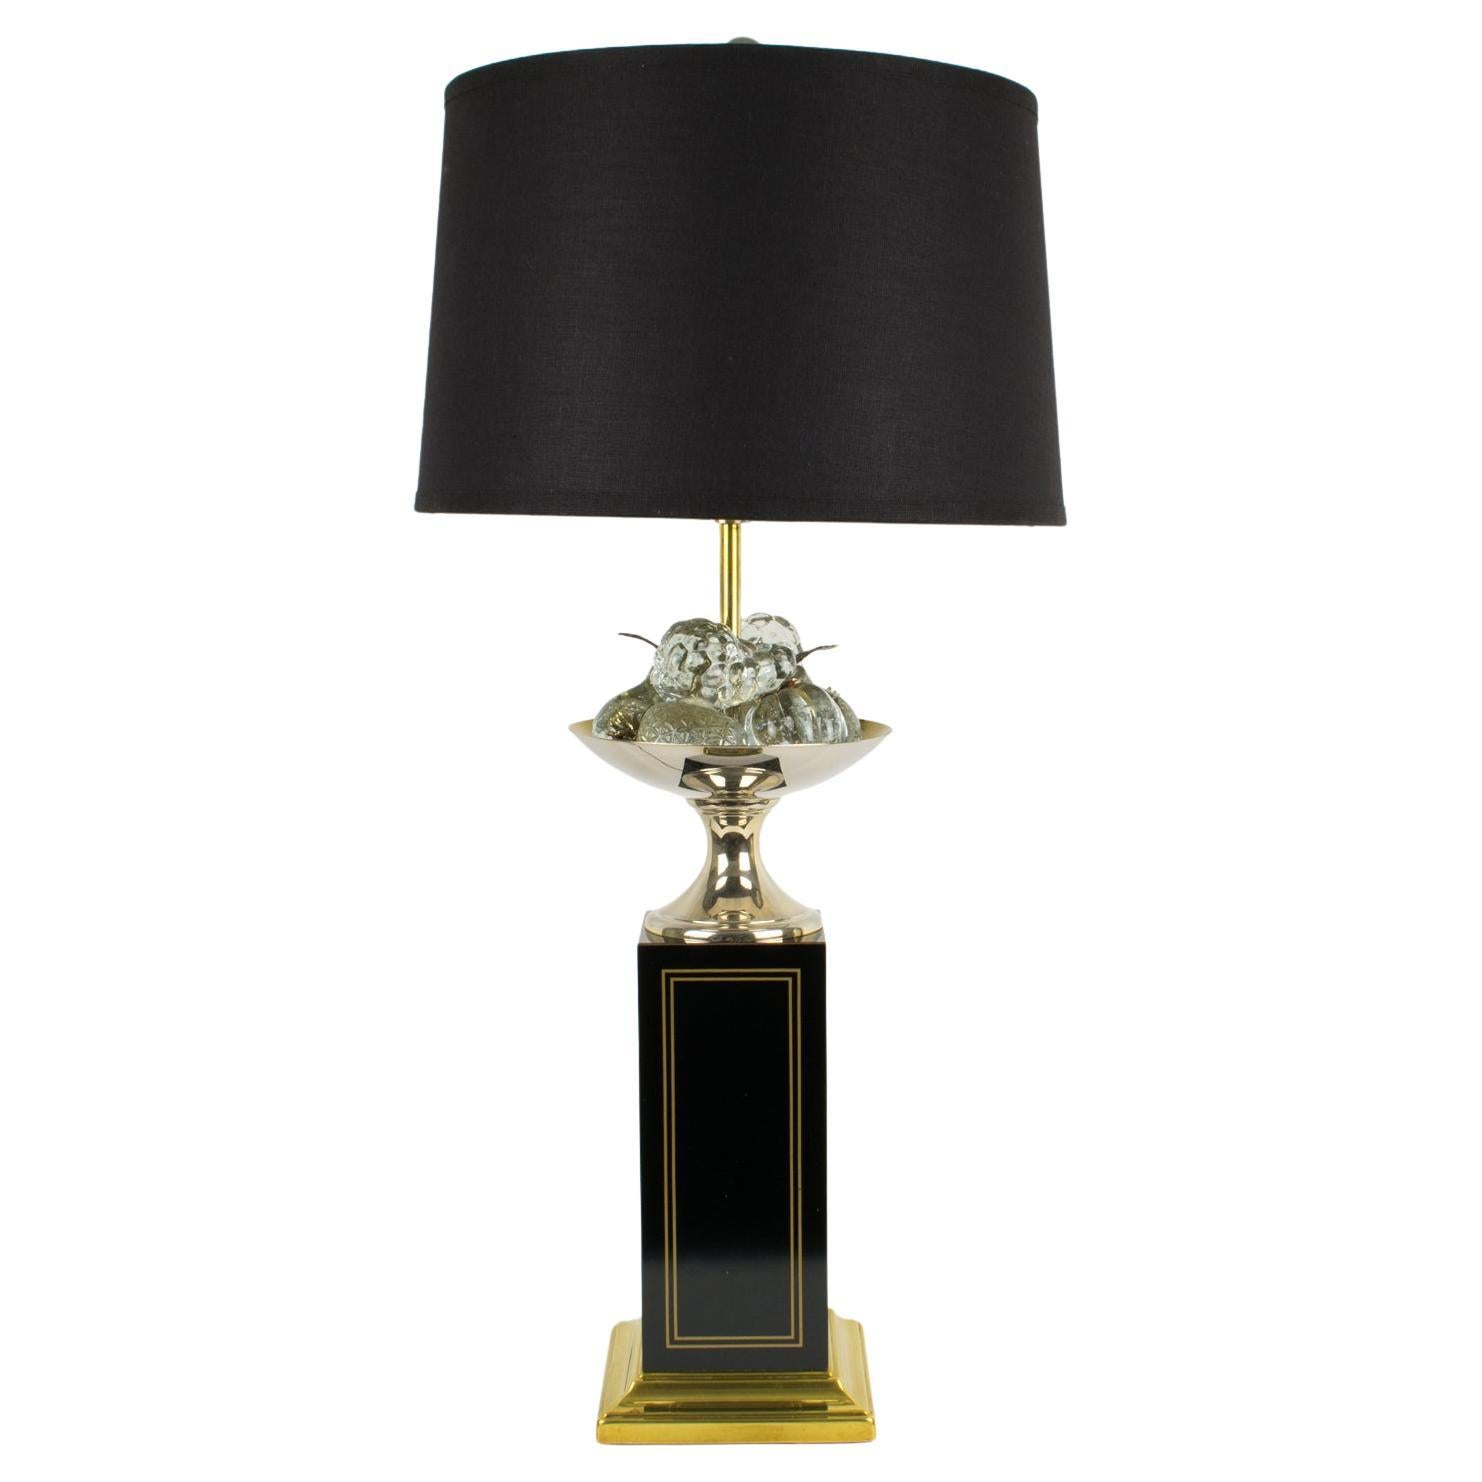 Maison Charles Black Enamel and Crystal Fruits Table Lamp, France 1960s